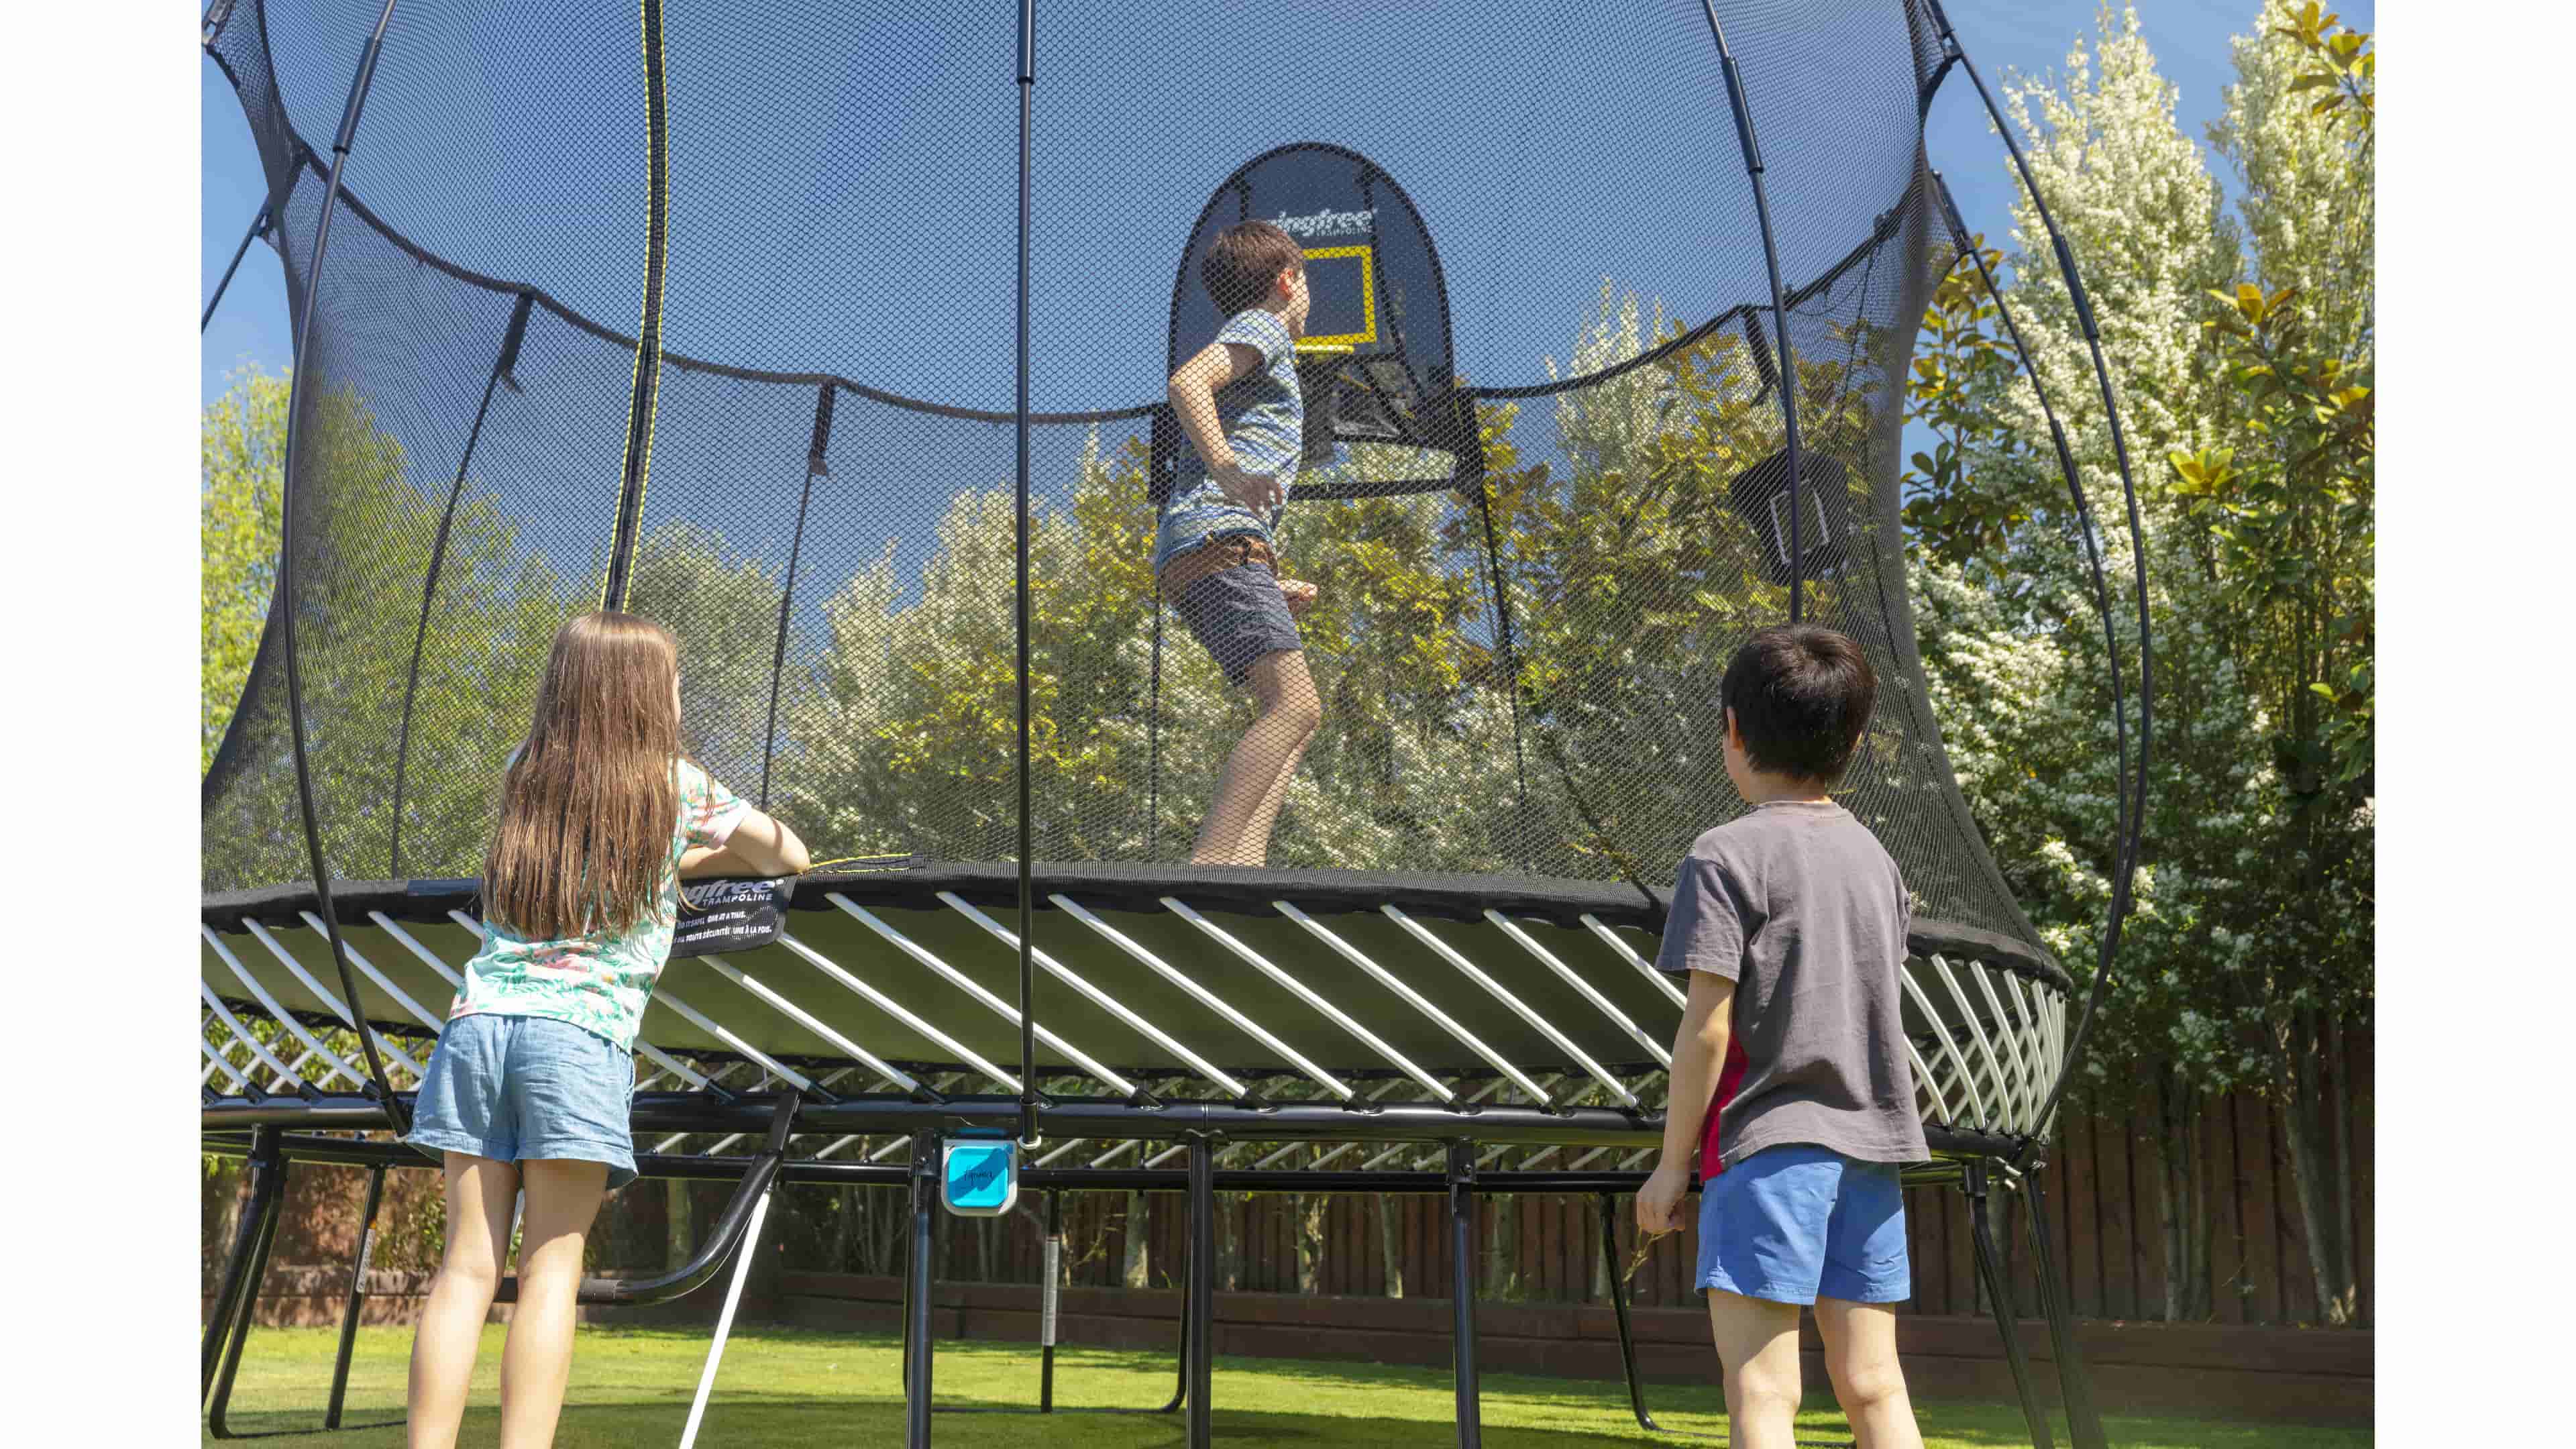 Indoor Trampoline for Kids and Adults: Tips and Options – Acon EU